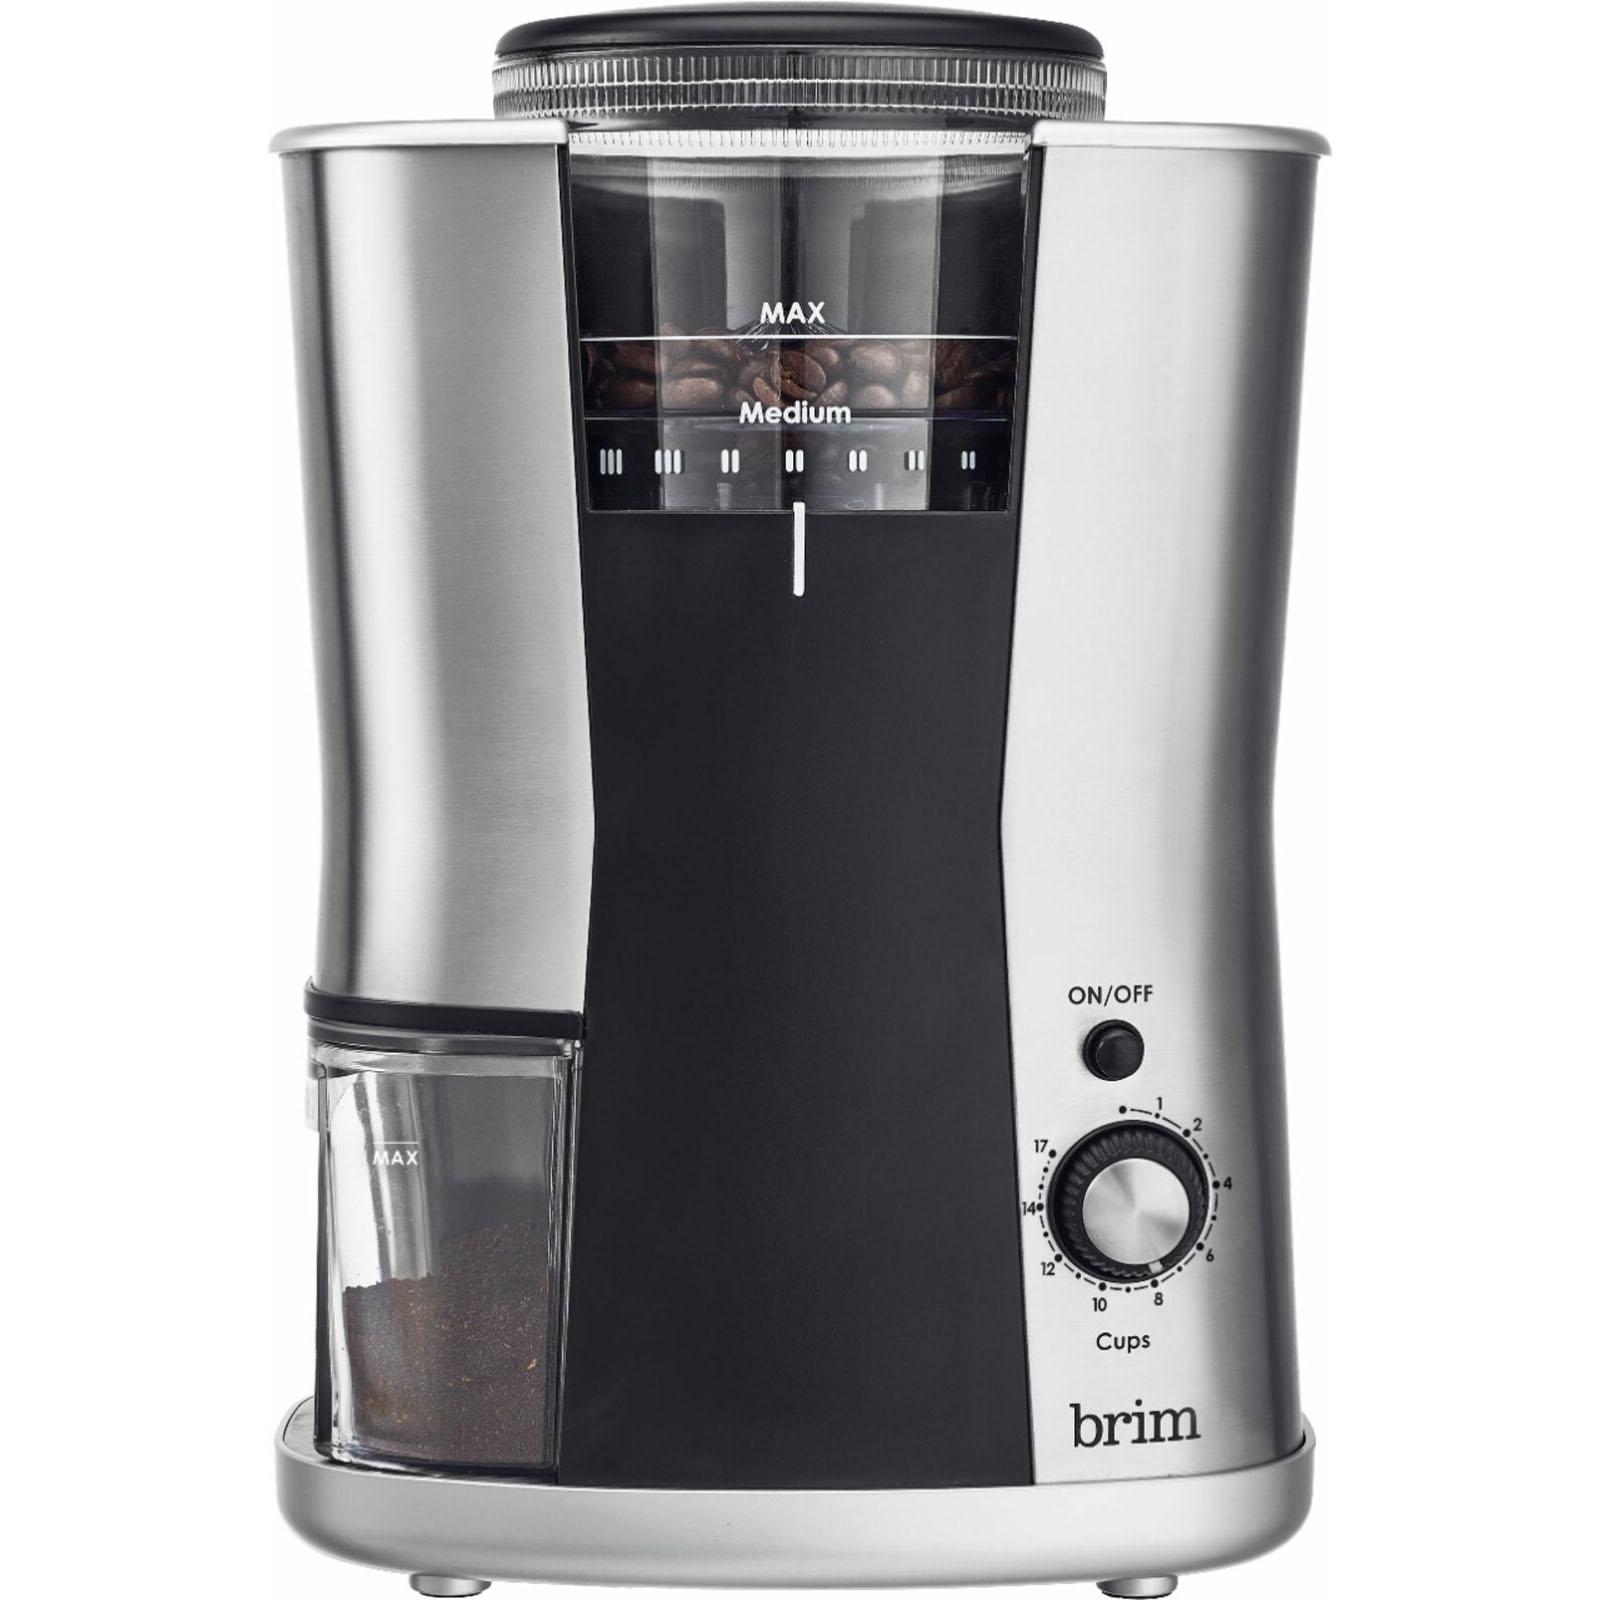 Brim Conical Burr Coffee Grinder for $35.99 Shipped